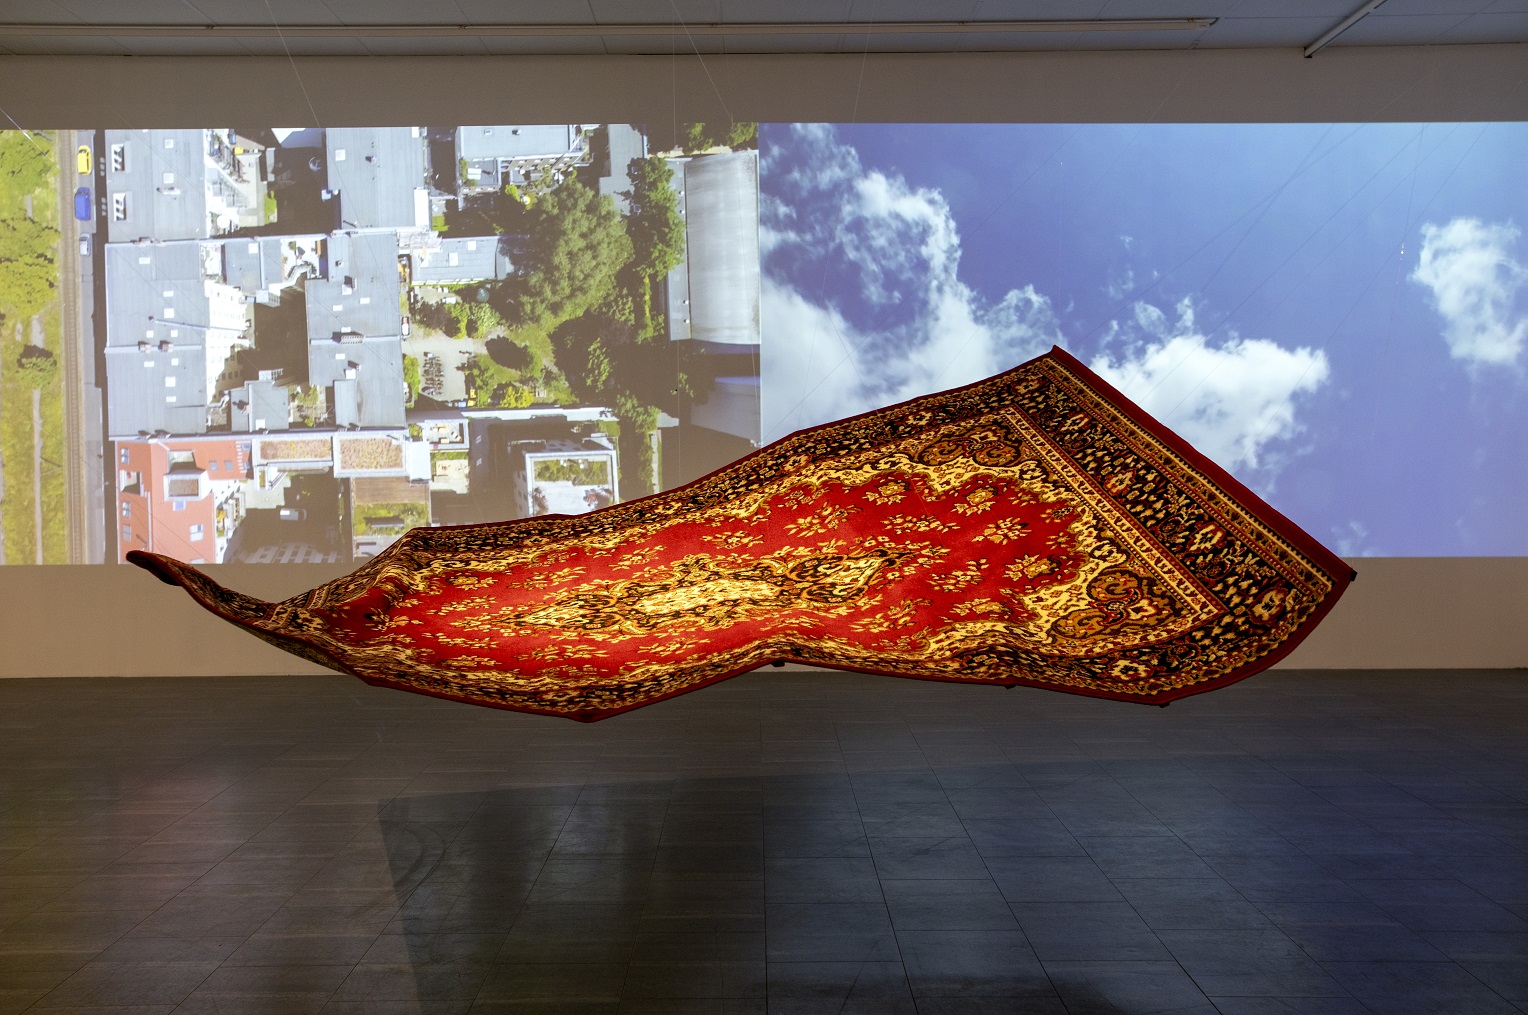 A red Persian carpet seems to float in the air in the middle of a room and in the background two photographs are projected onto a white wall. The image on the left is taken above a buildings and a road with cars and the second image is of a blue sky with clouds.